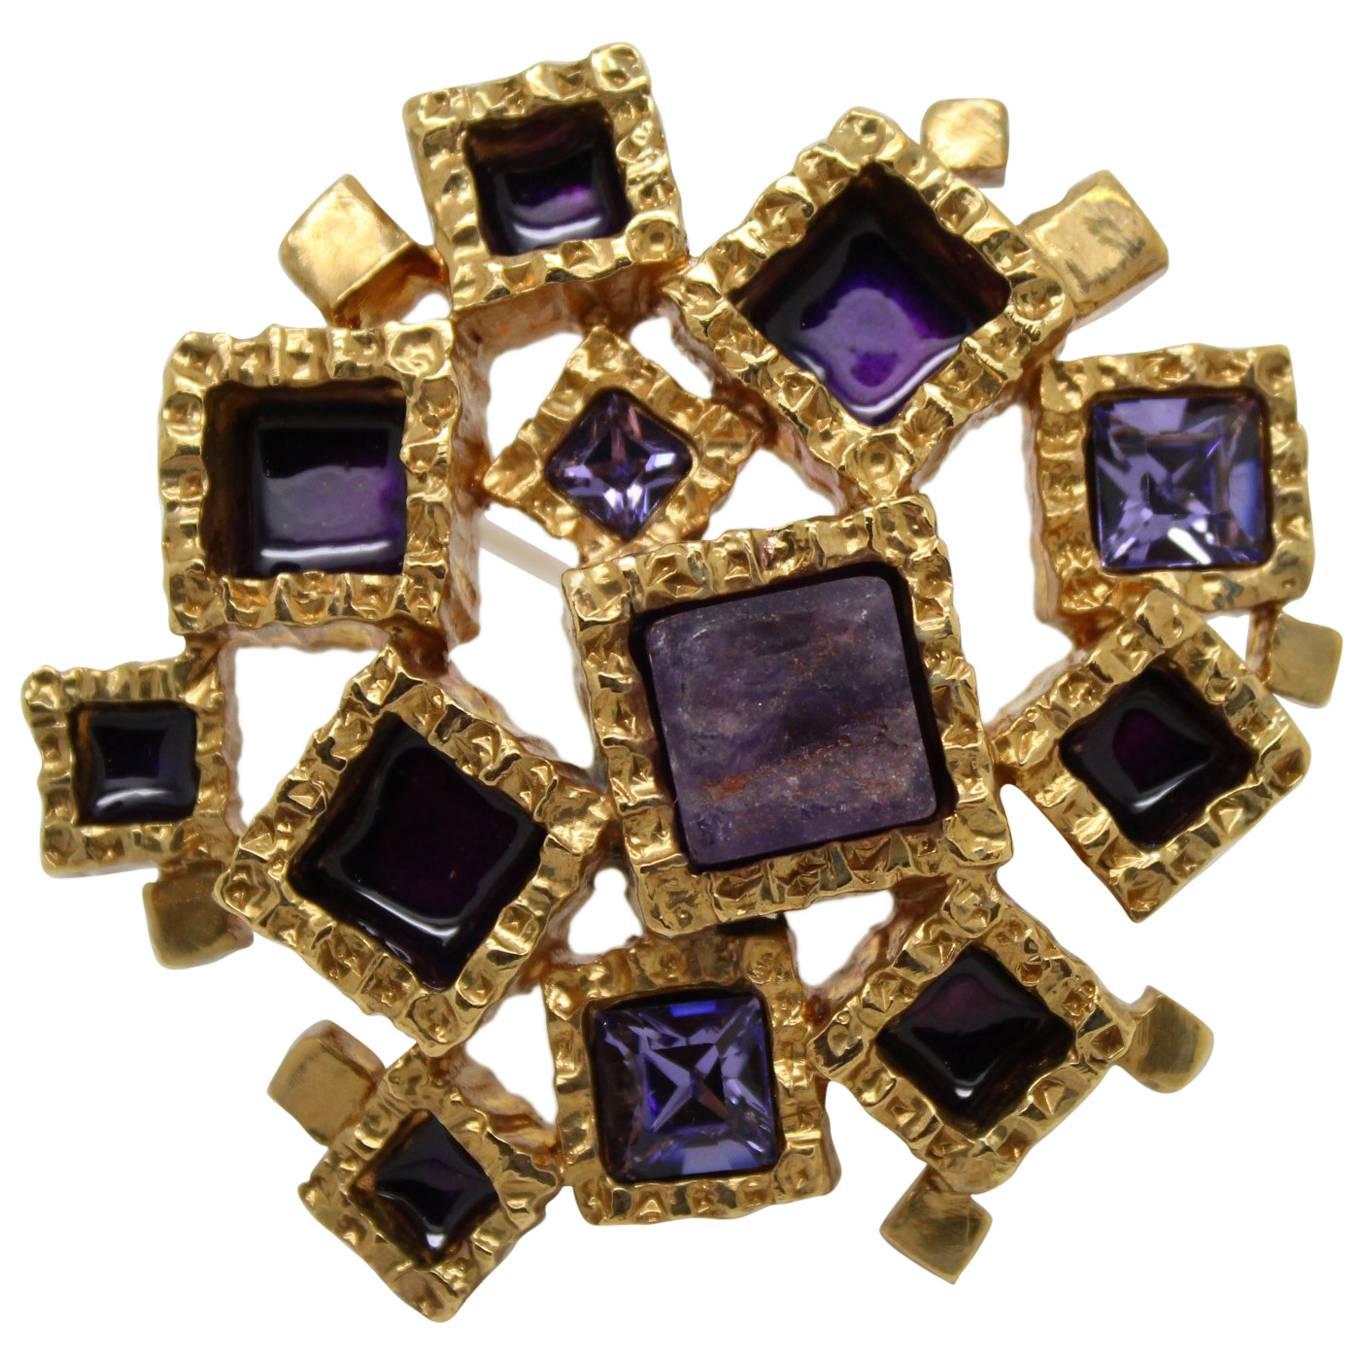 Awesome Yves Saint Laurent Golden Brooch with purple stones For Sale